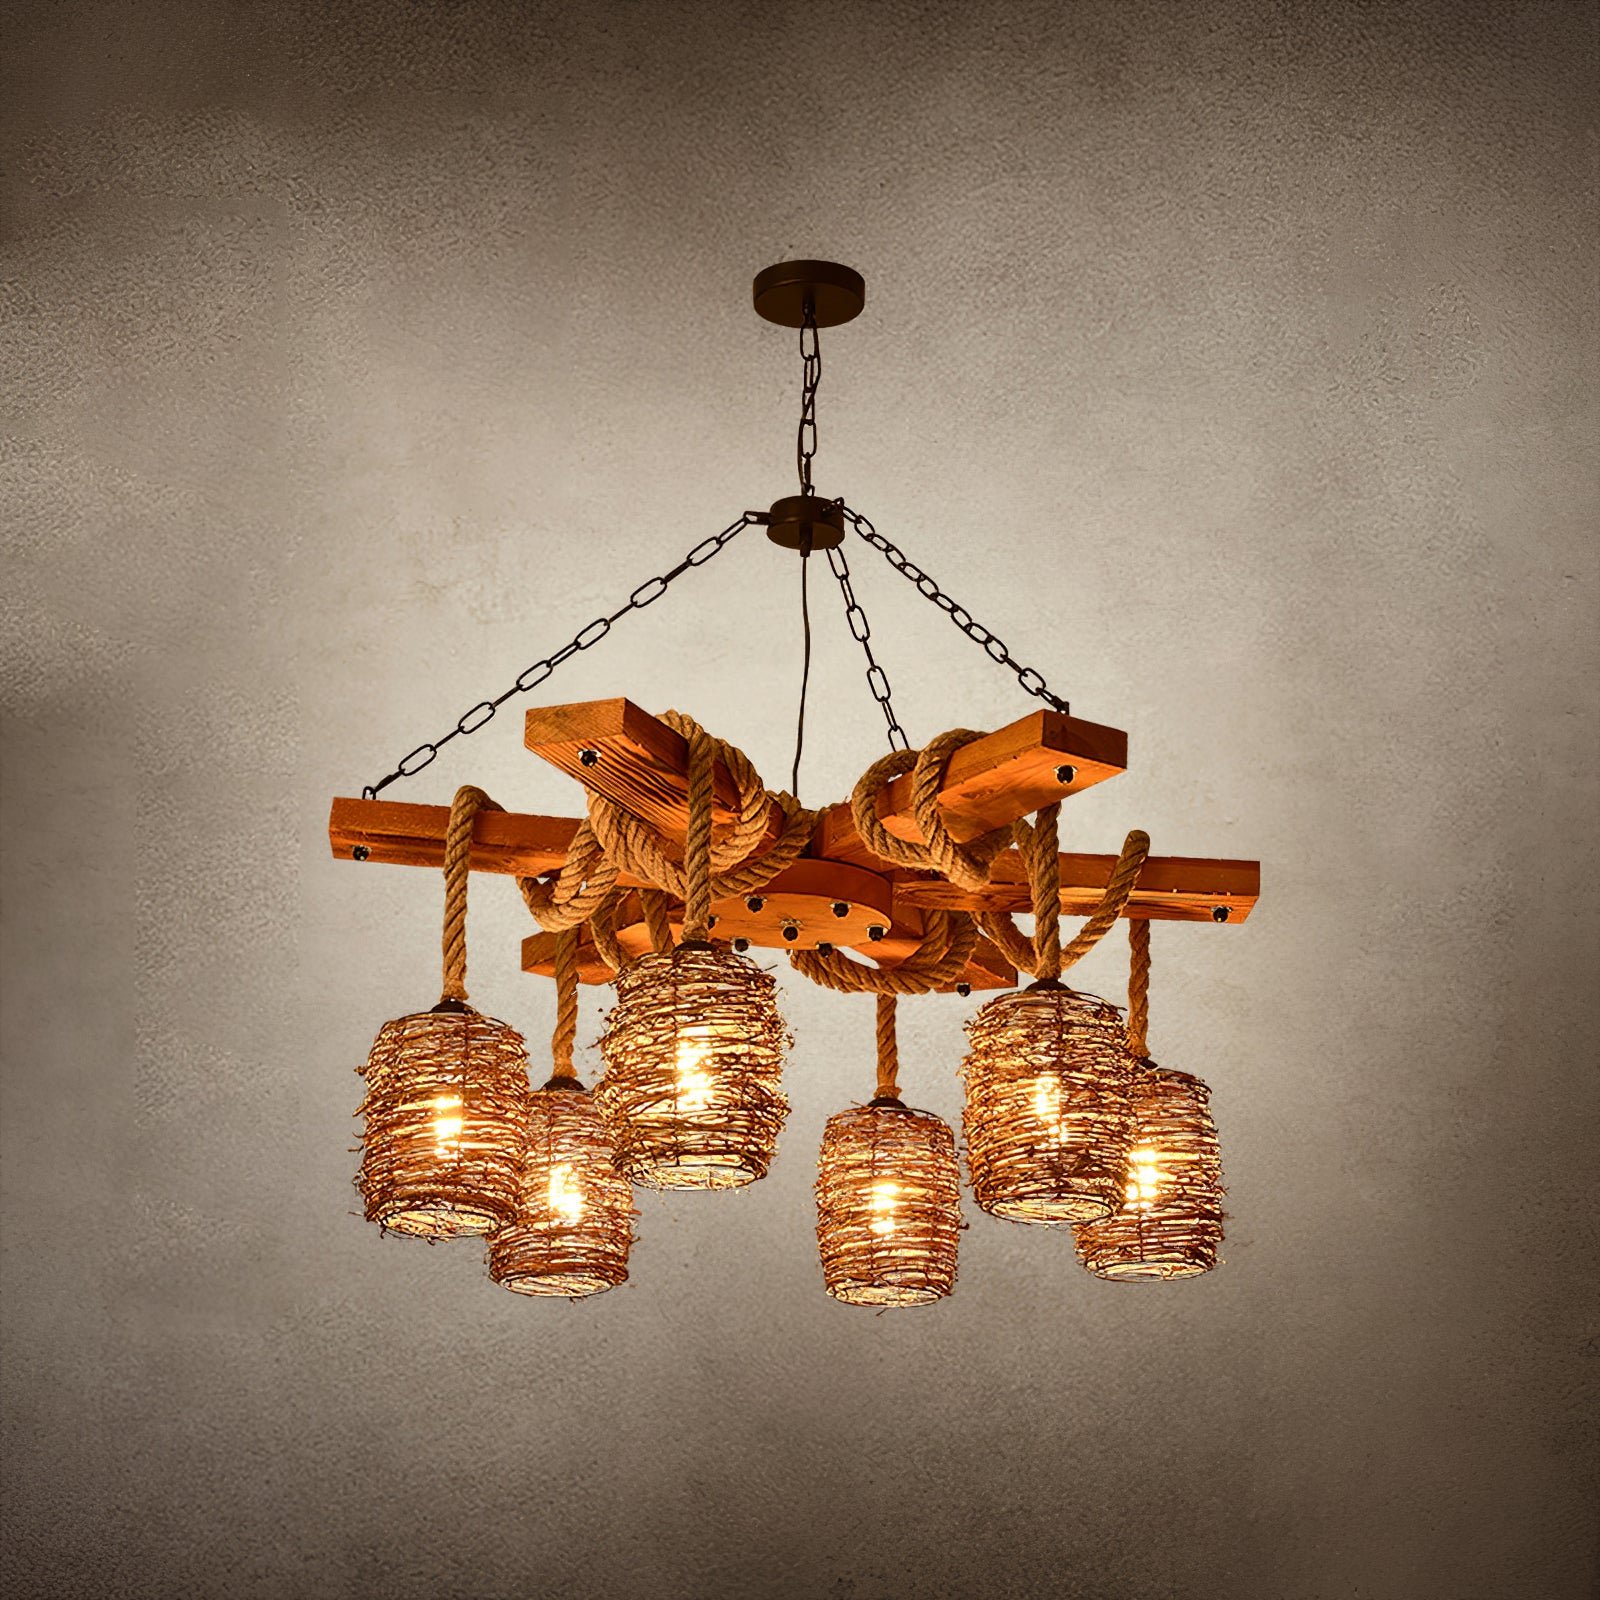 Vintage Farmhouse Chandelier with 6 heads, measuring 36.6 inches in diameter and 19.6 inches in height (or 93cm x 50cm), available in black or brown color.